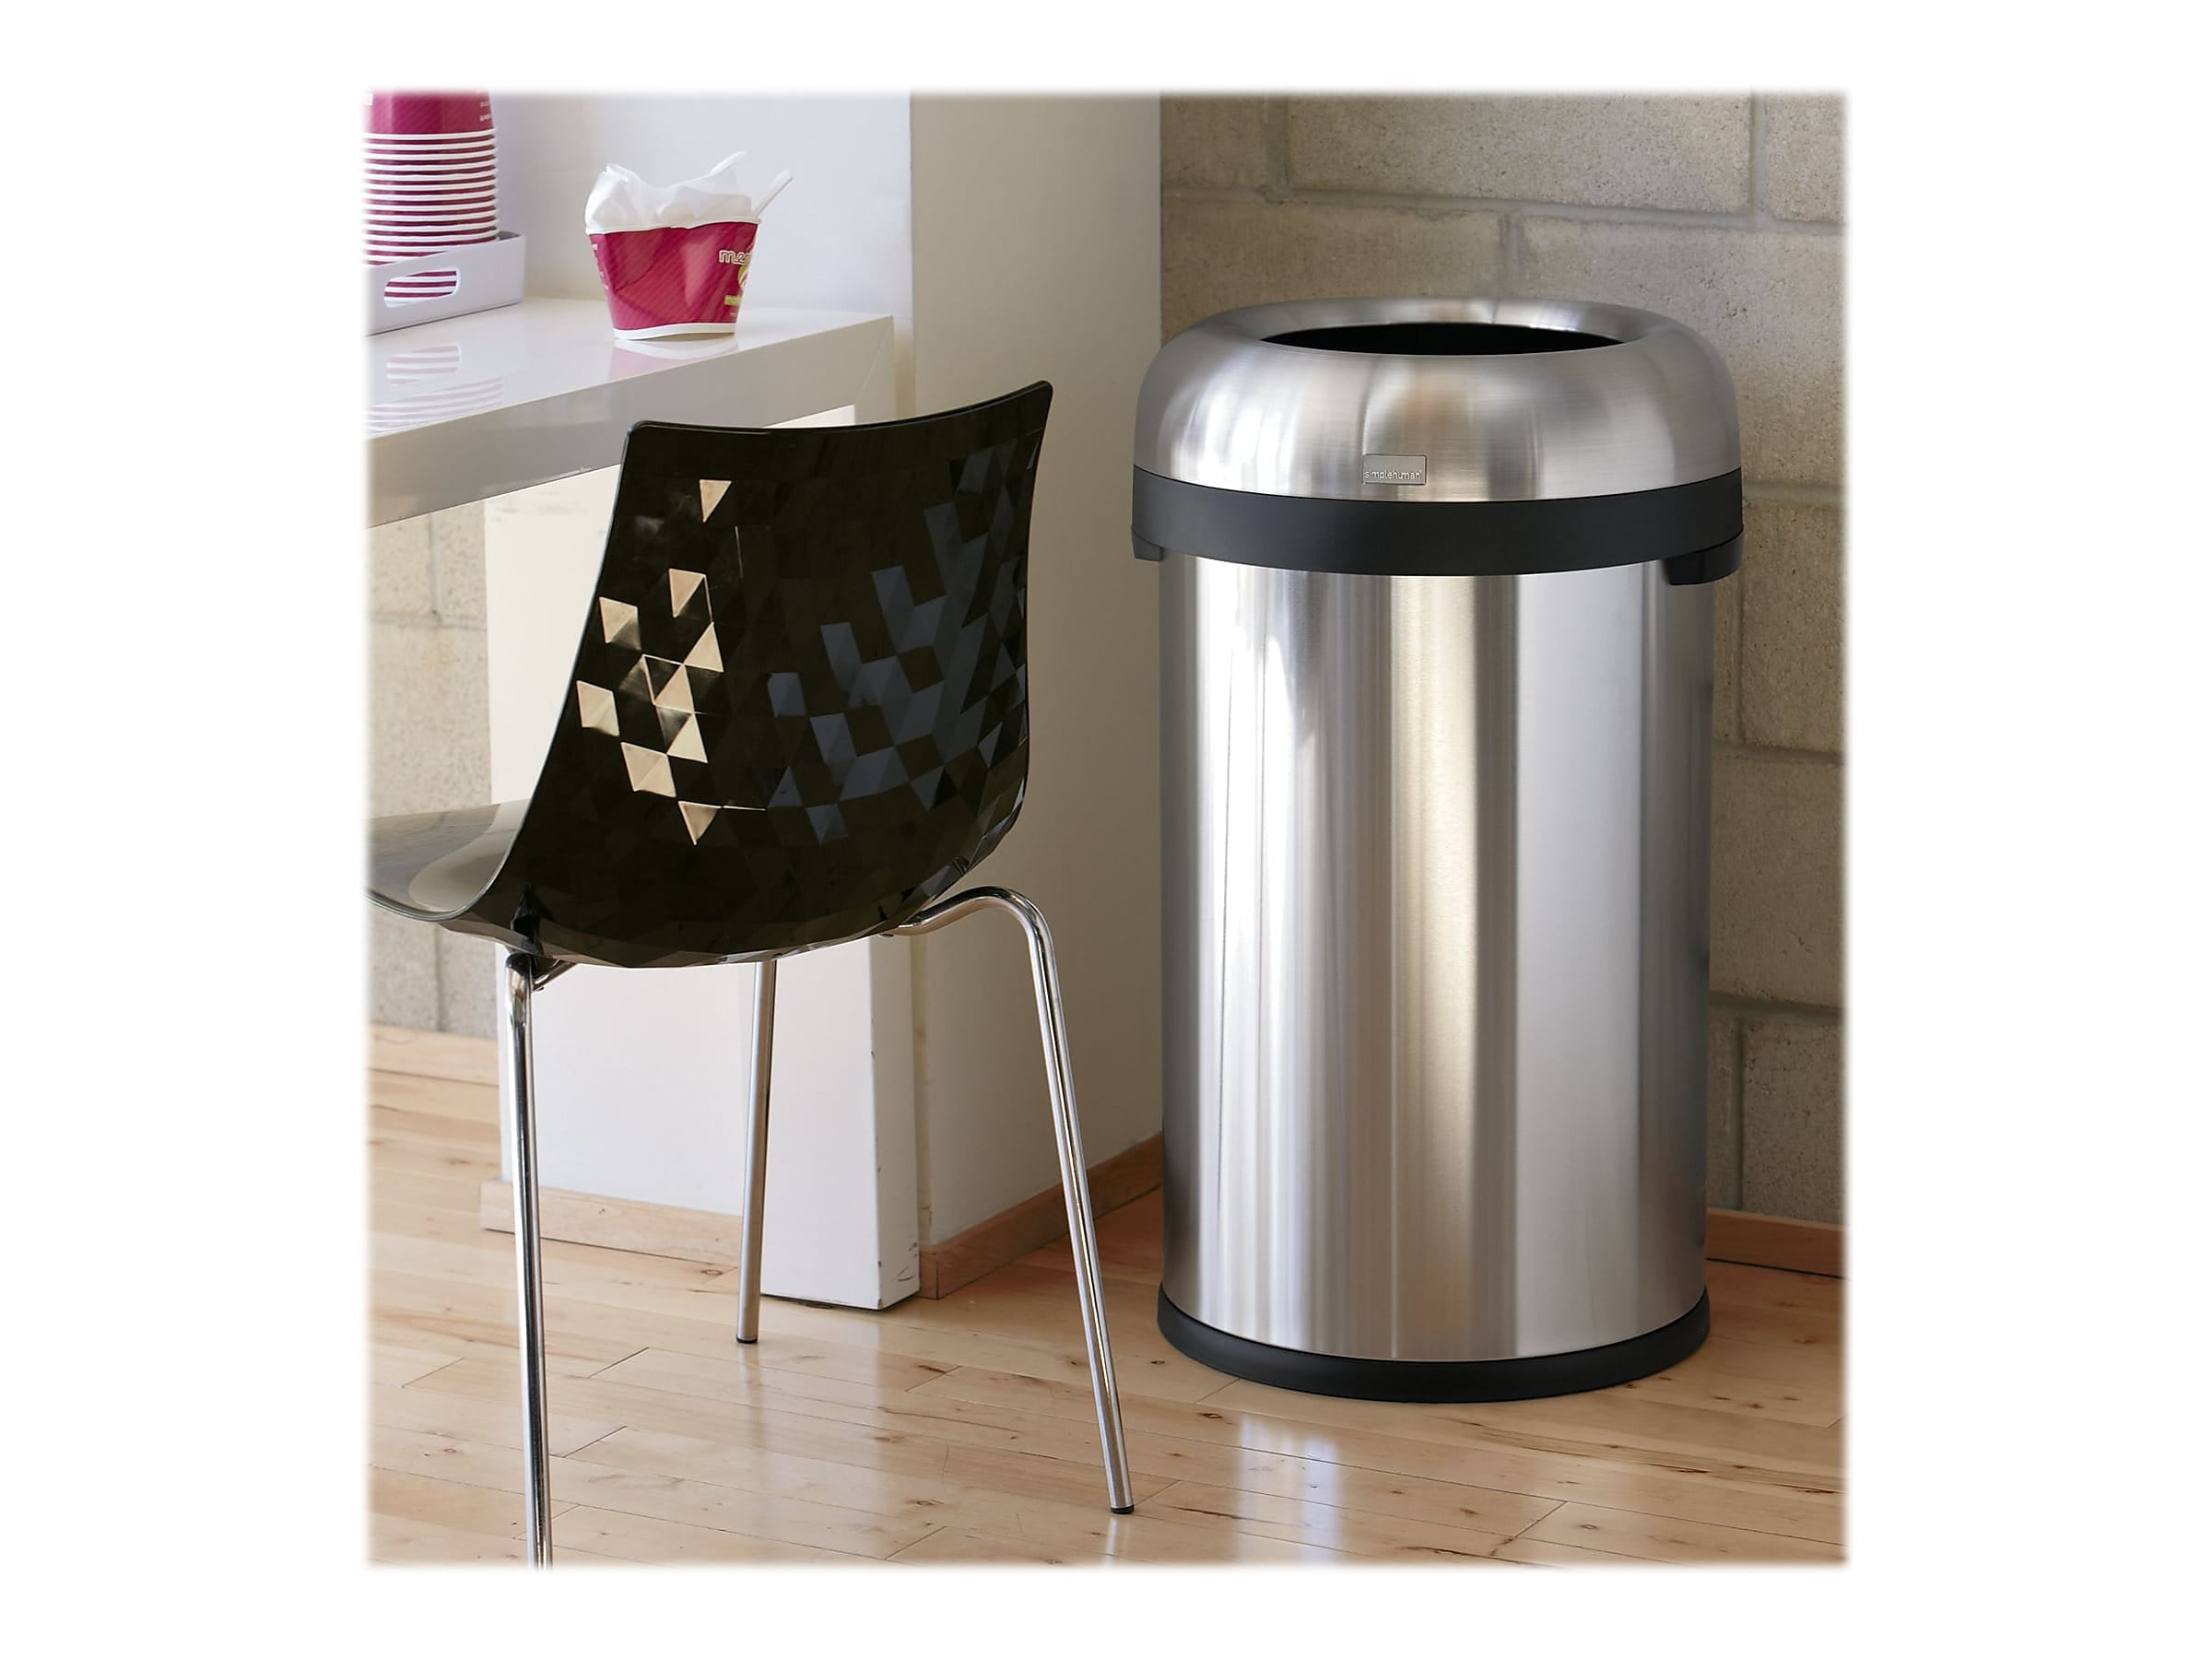 30 Gallon Stainless Steel Office Black Trash Can, Open Top Garbage Can for  School, Hotel ,Hospital, Elevator Entrance, Supermarket